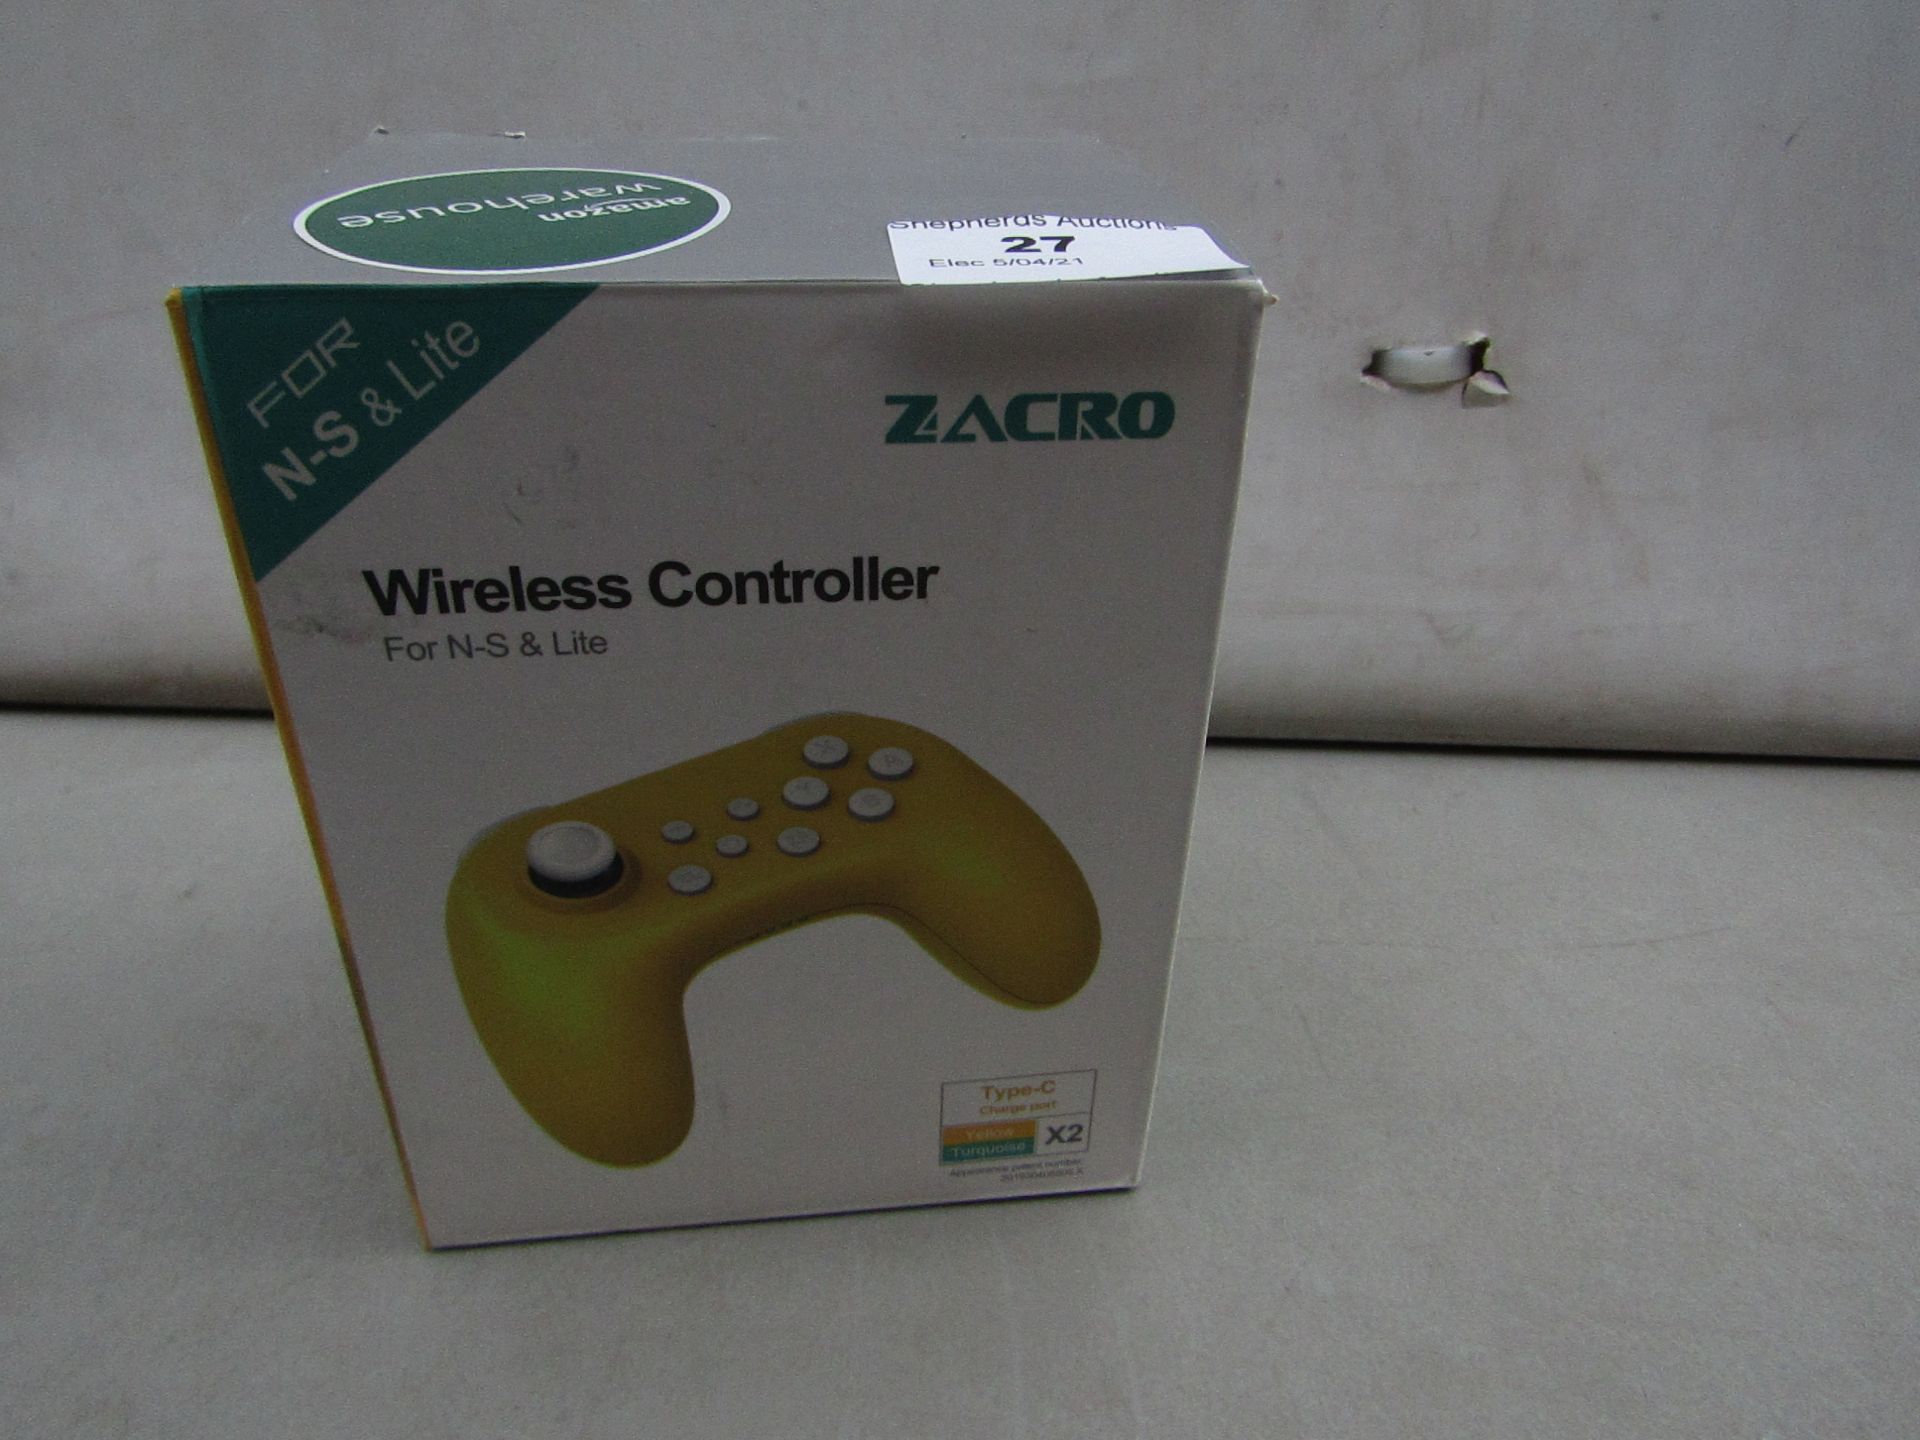 Zacro Wireless Controller For N-S & Lite Unchecked & Boxed